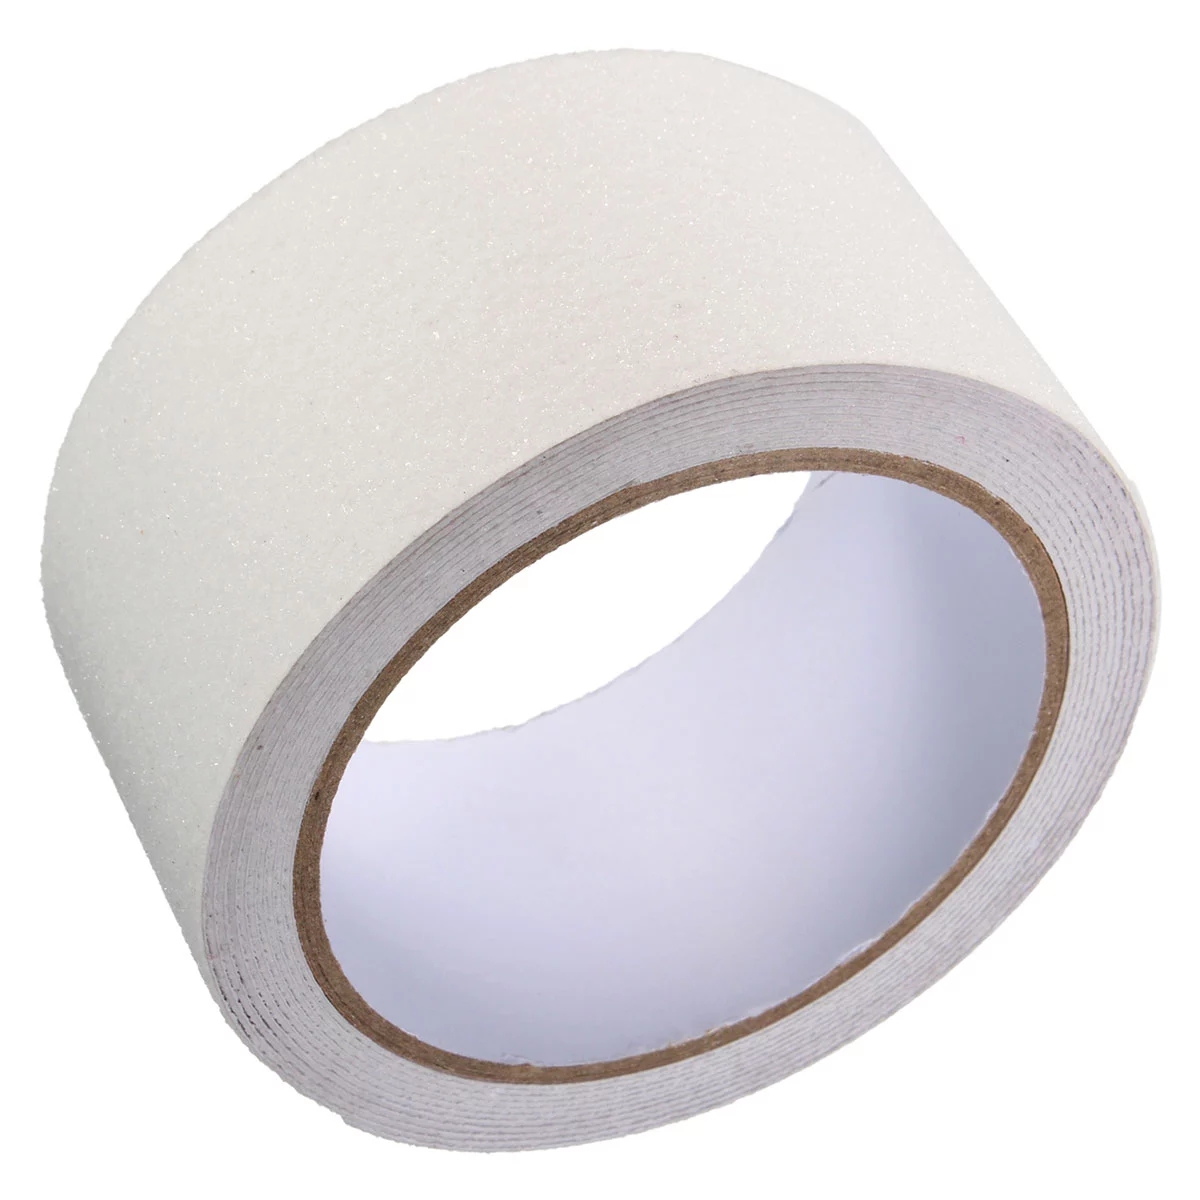 Non-Slip-Safety-Grip-Tape-Anti-Slip-Indoor-Outdoor-Stickers-Strong-Adhesive-Safety-Traction-Tape-Sta-1751585-5